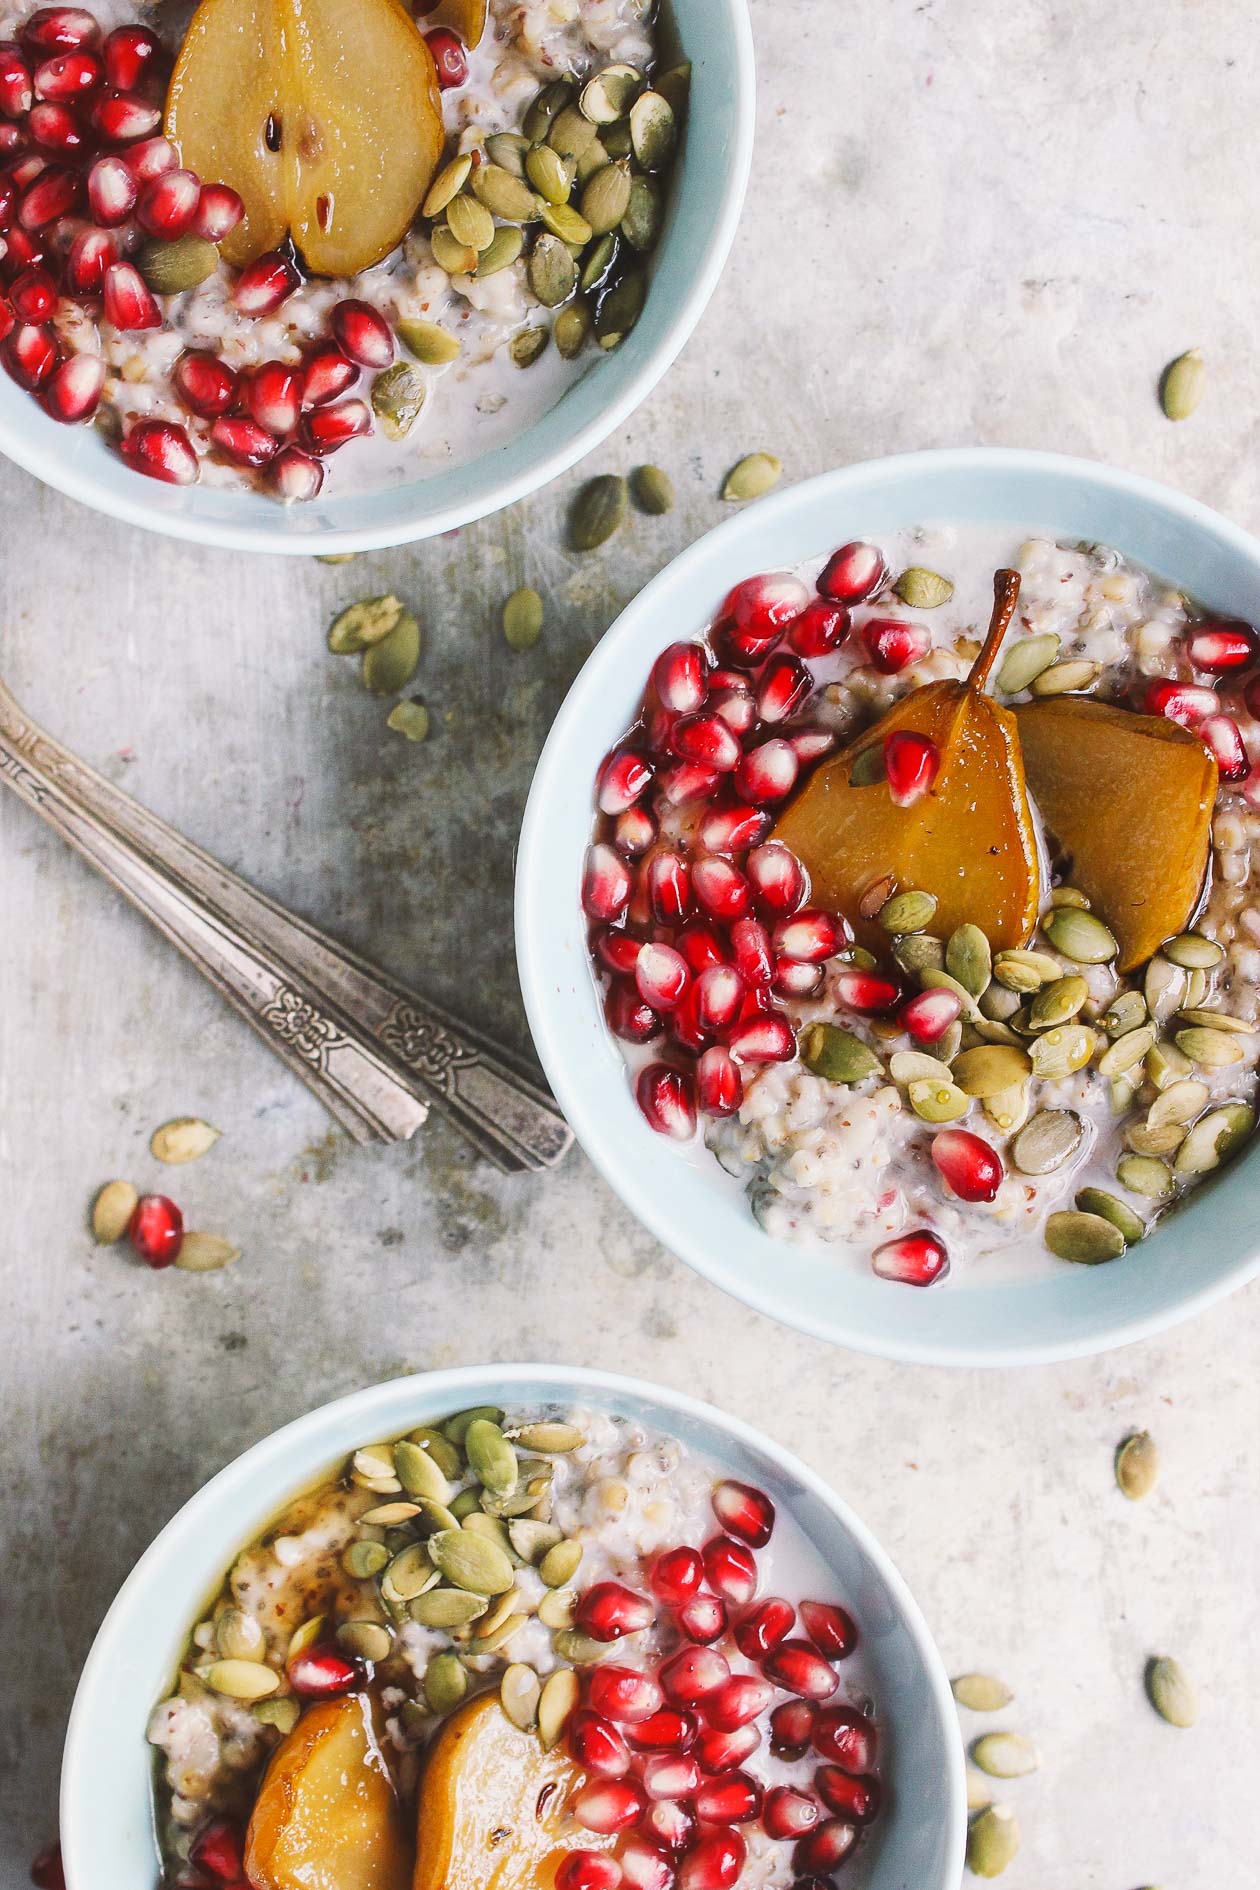 Super Seed Steel Cut Oats with Maple Roasted Pears + Pomegranate | Super seed steel cut oats packed with chia and flax and lightly sweetened with maple roasted pears. Oats can be made ahead of time to have on hand all week. 